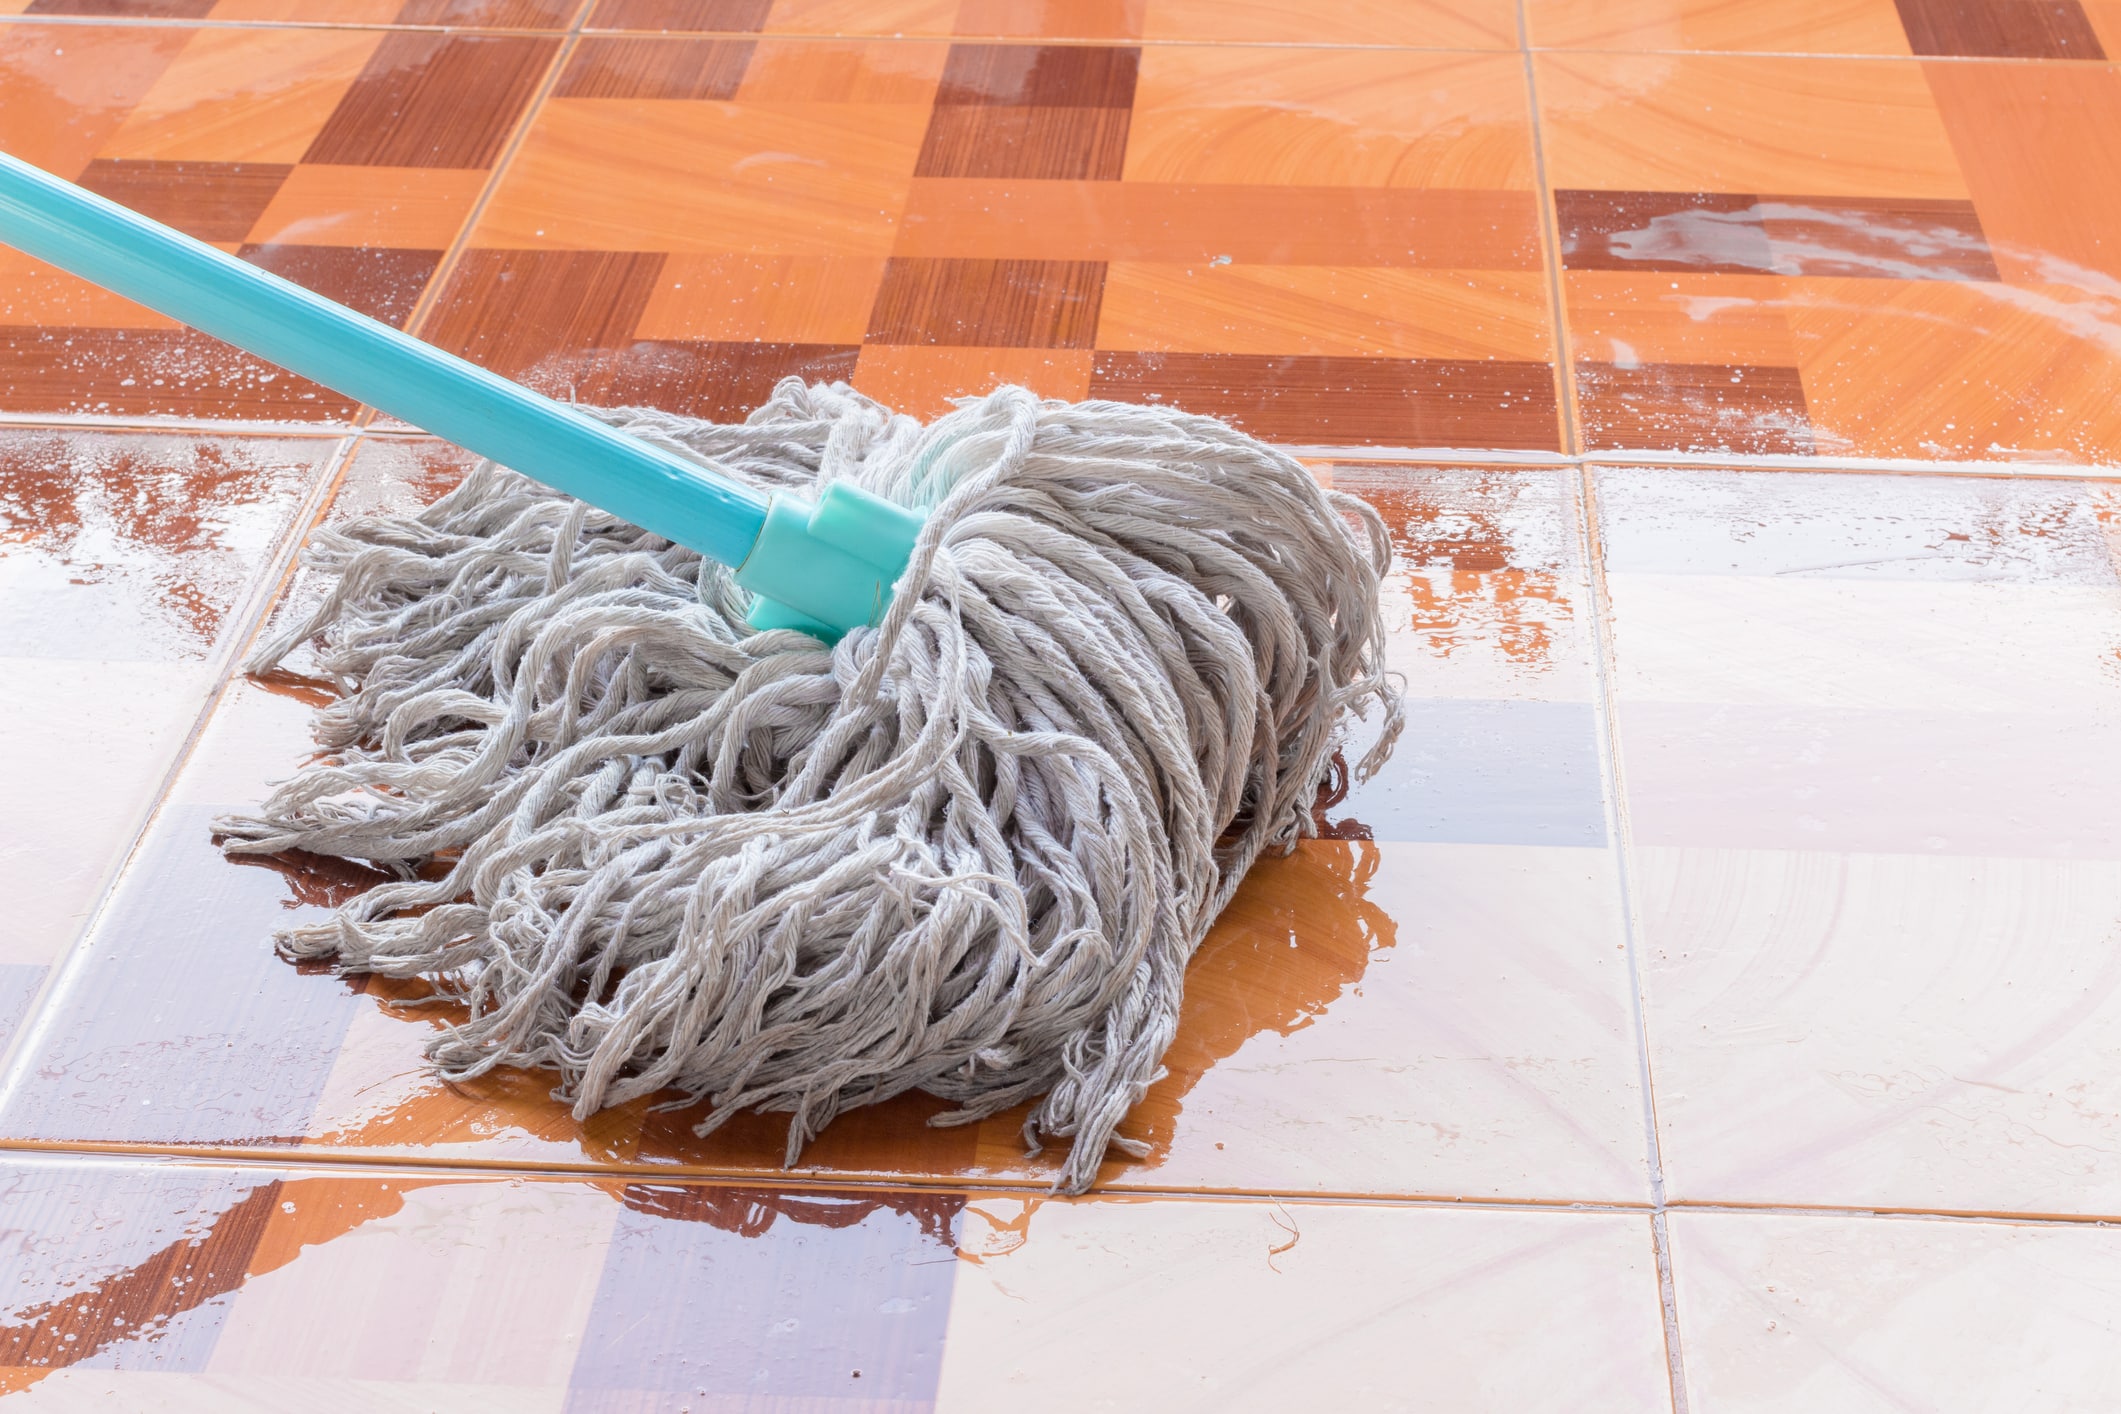 Floor Safety-How To Effectively Clean Your Floors